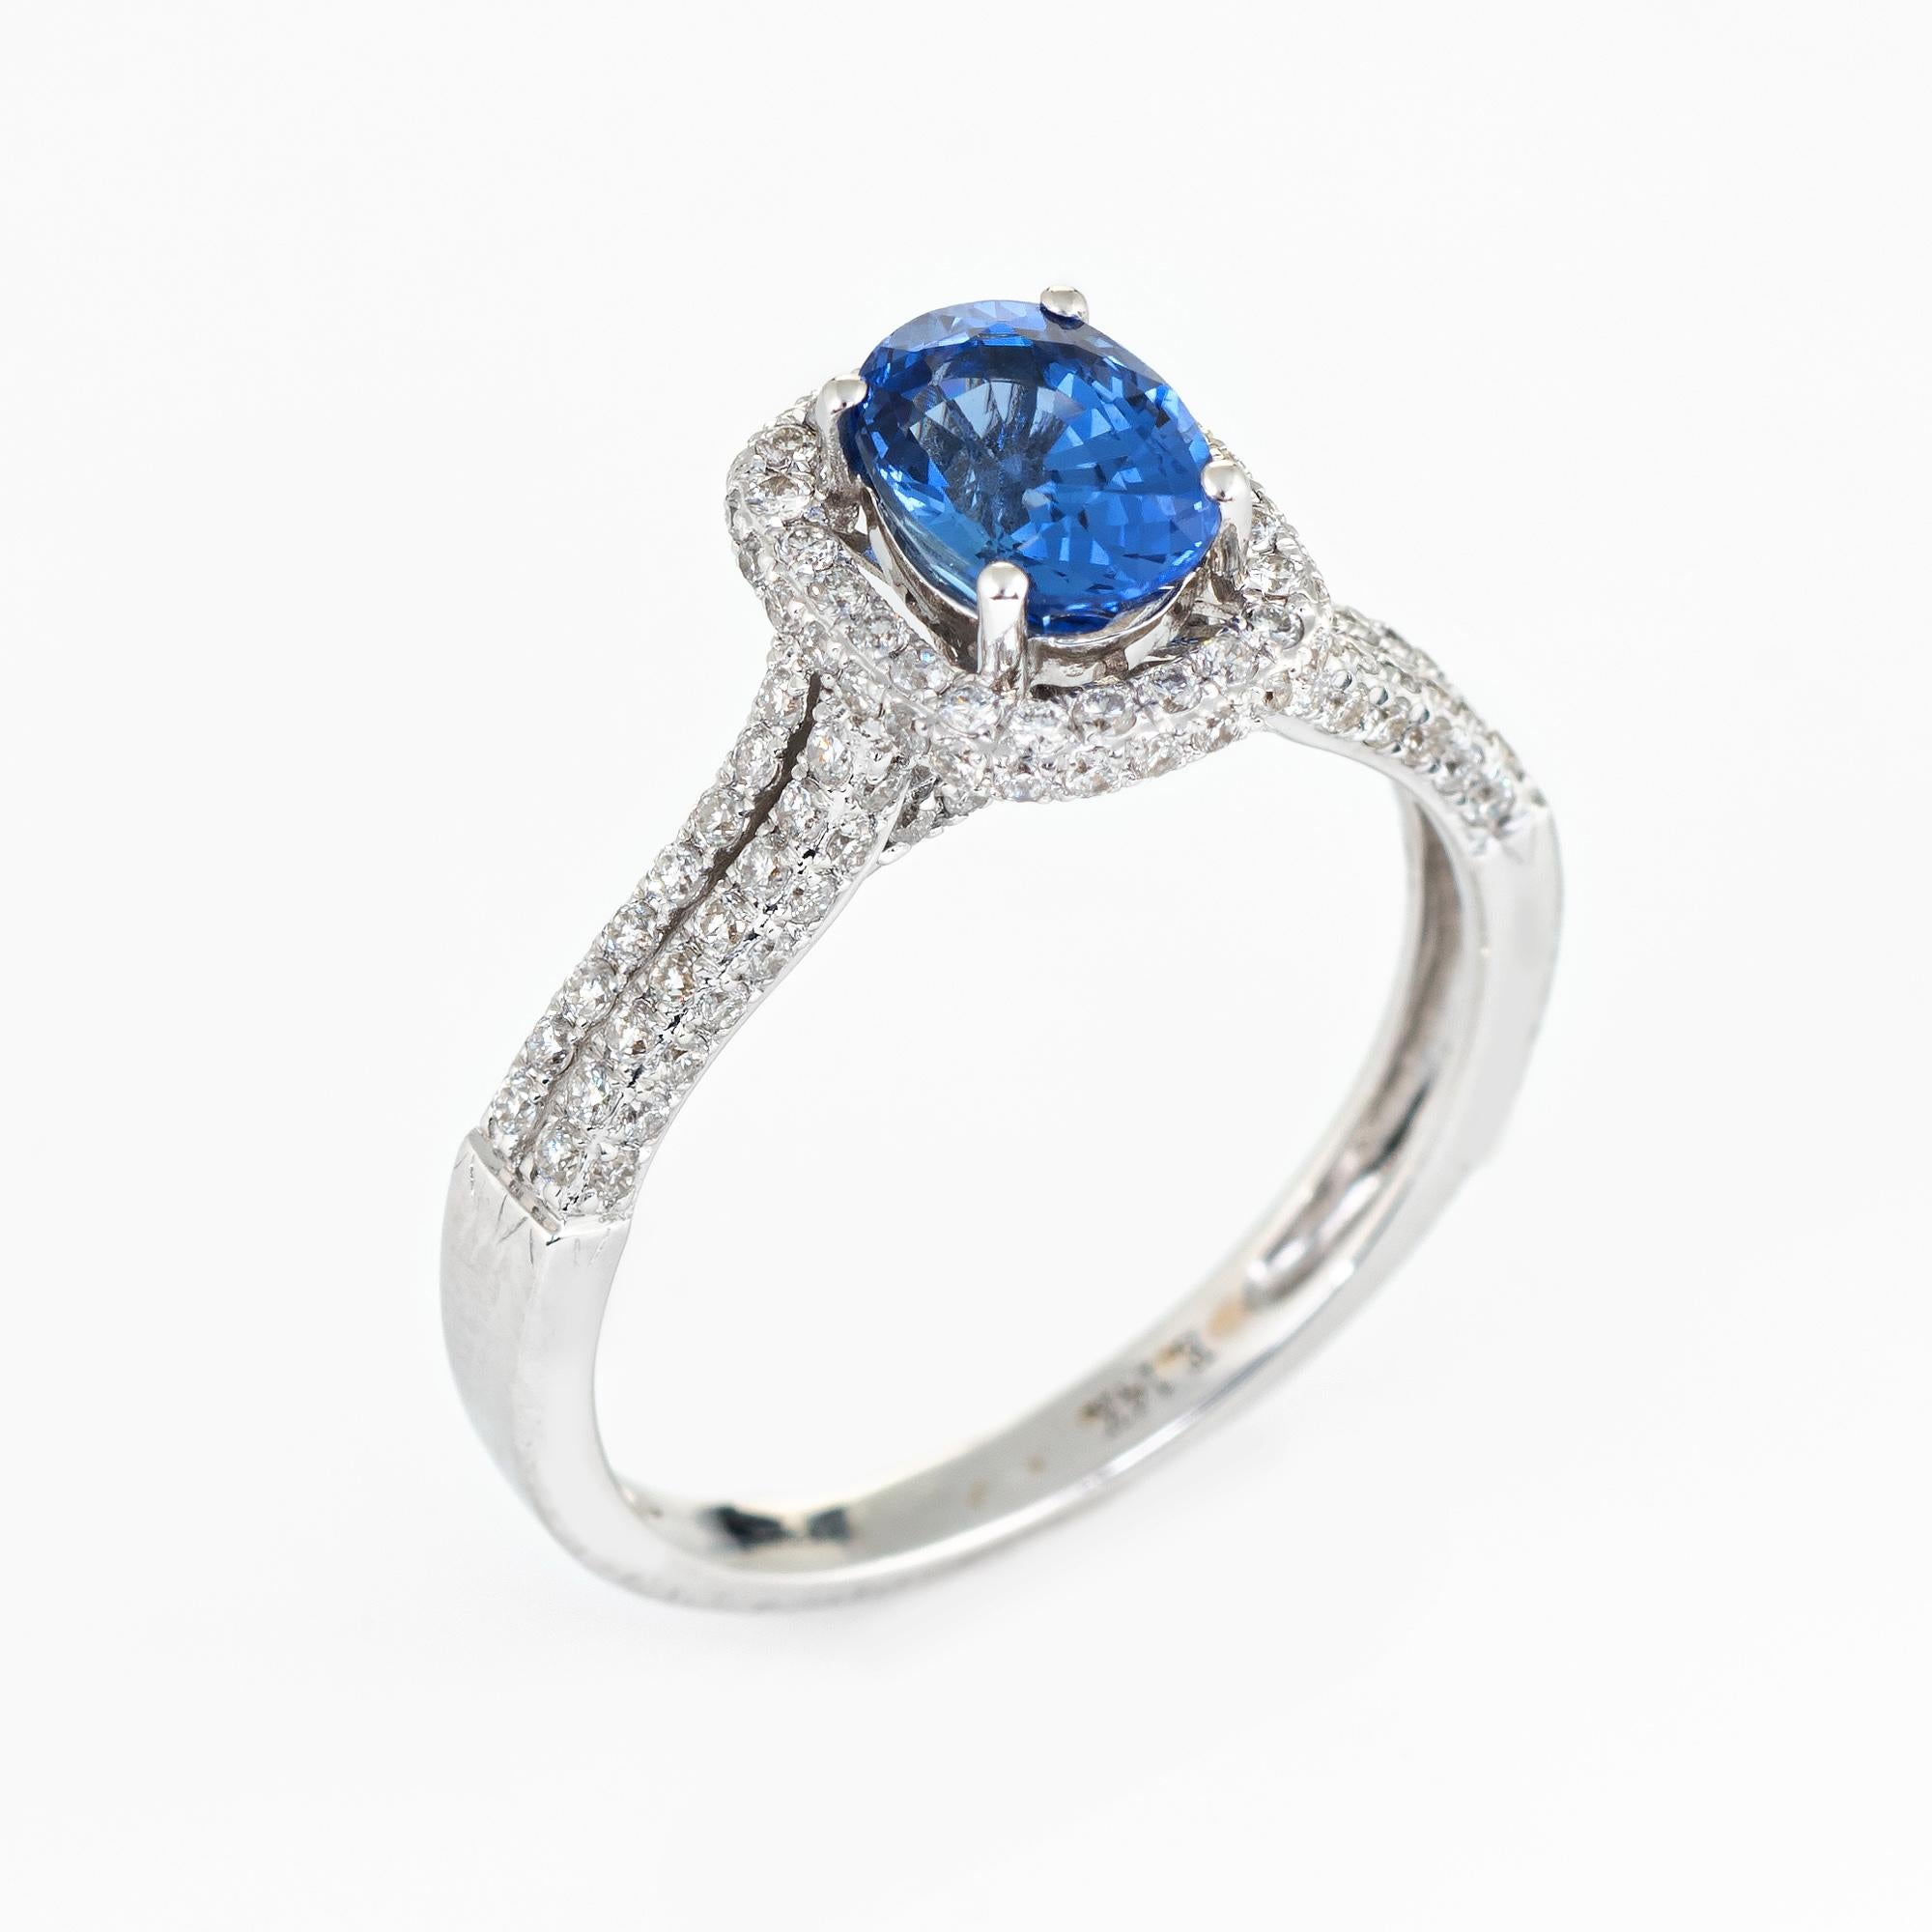 
Stylish contemporary sapphire & diamond halo ring crafted in 14 karat white gold. 

Faceted oval sapphire measures 7mm x 5.5mm (estimated at 0.75 carats). Round brilliant cut diamonds total an estimated 0.60 carats. The tanzanite is in very good